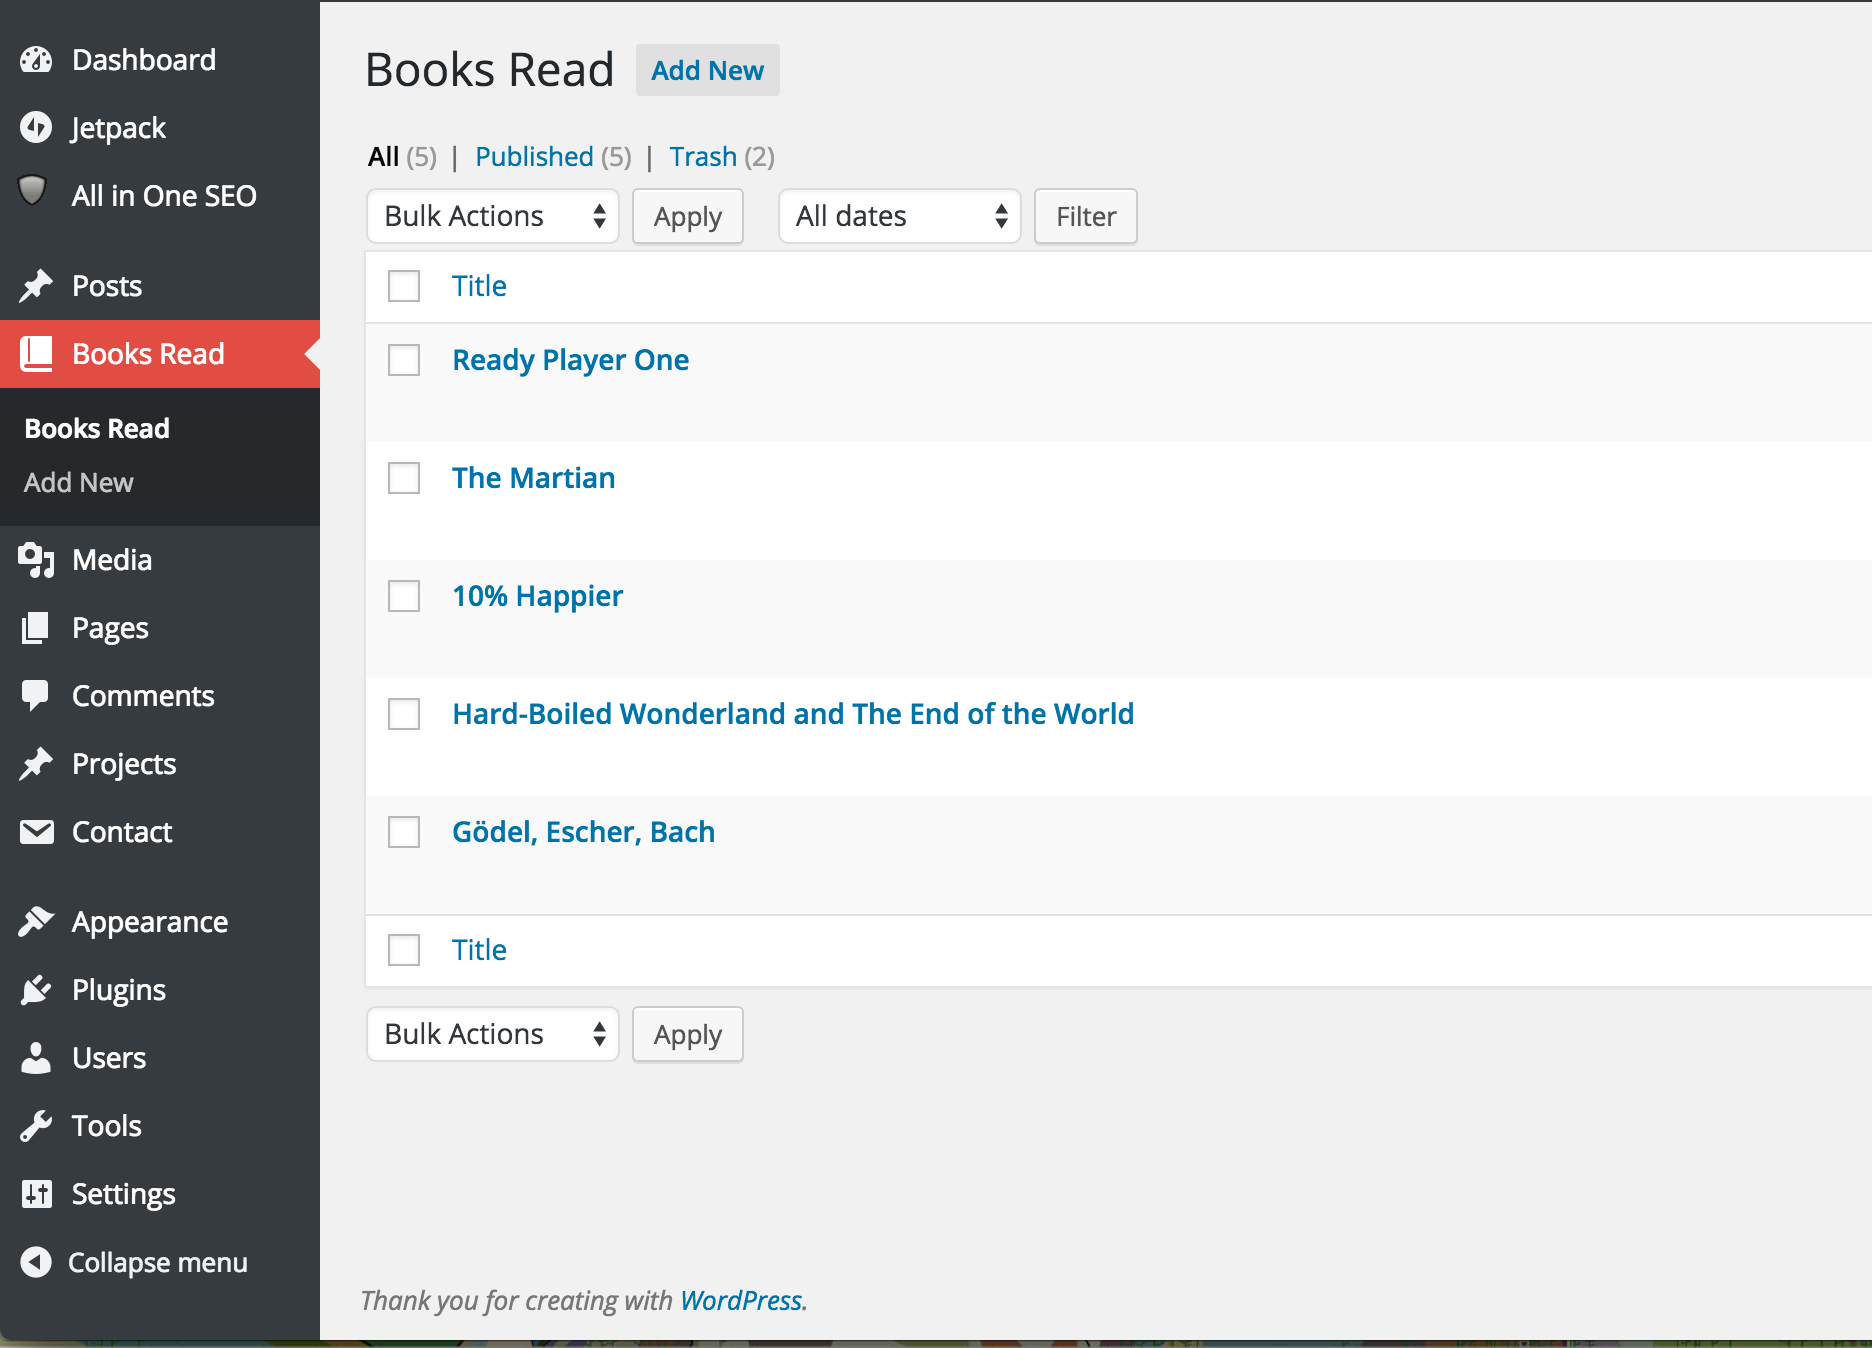 View of the `Books Read` blog post type and where/how it’s displayed on your WordPress installation